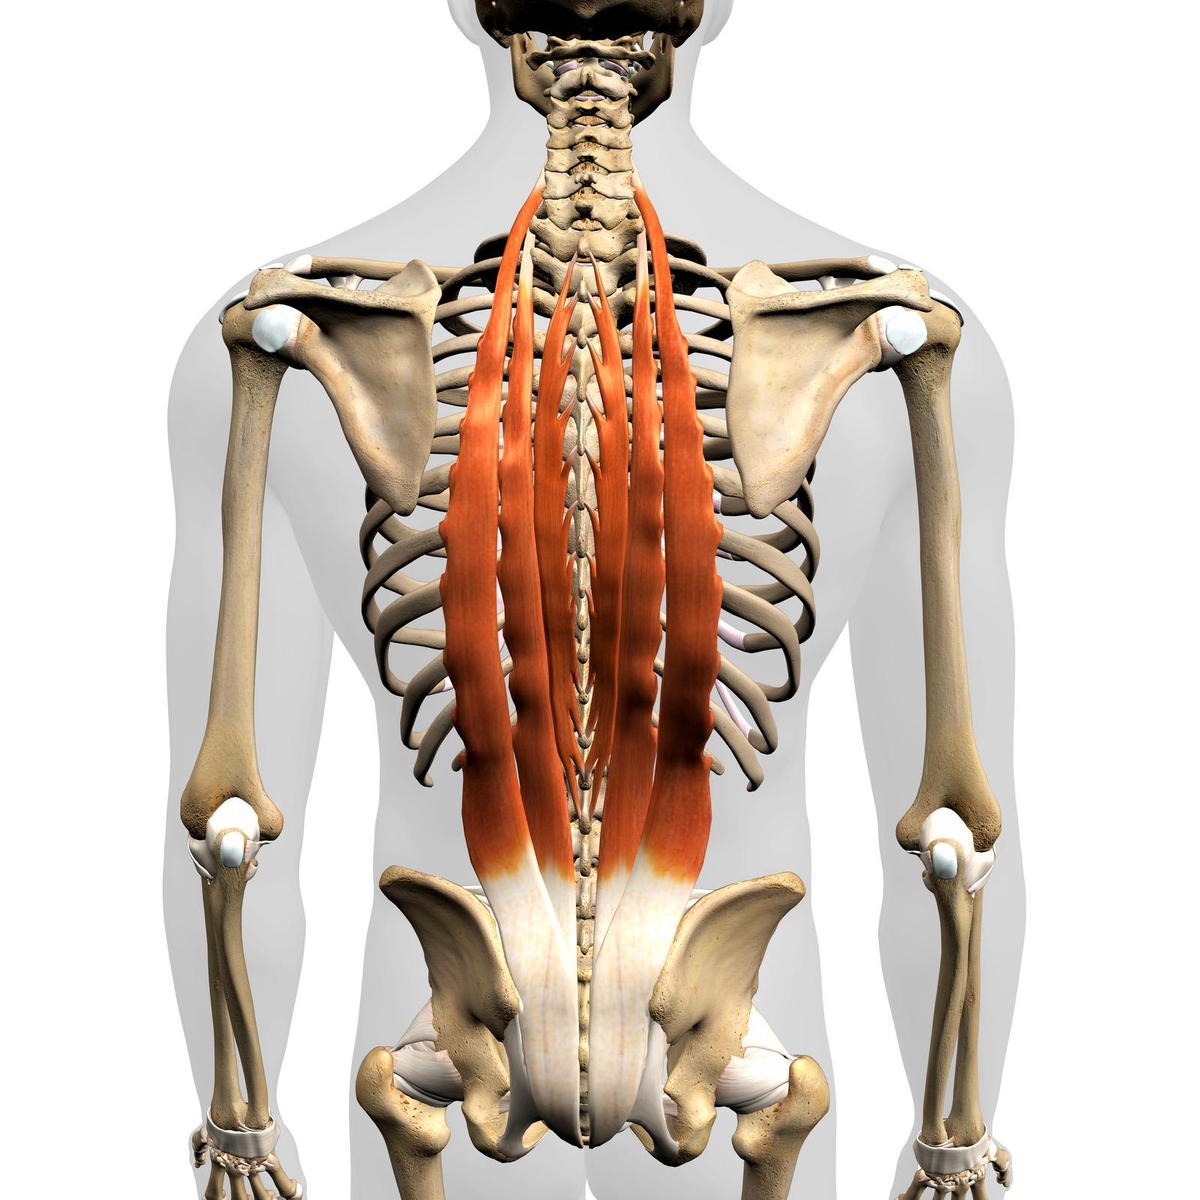 Fascial Lines, chiropractic, Low back pain